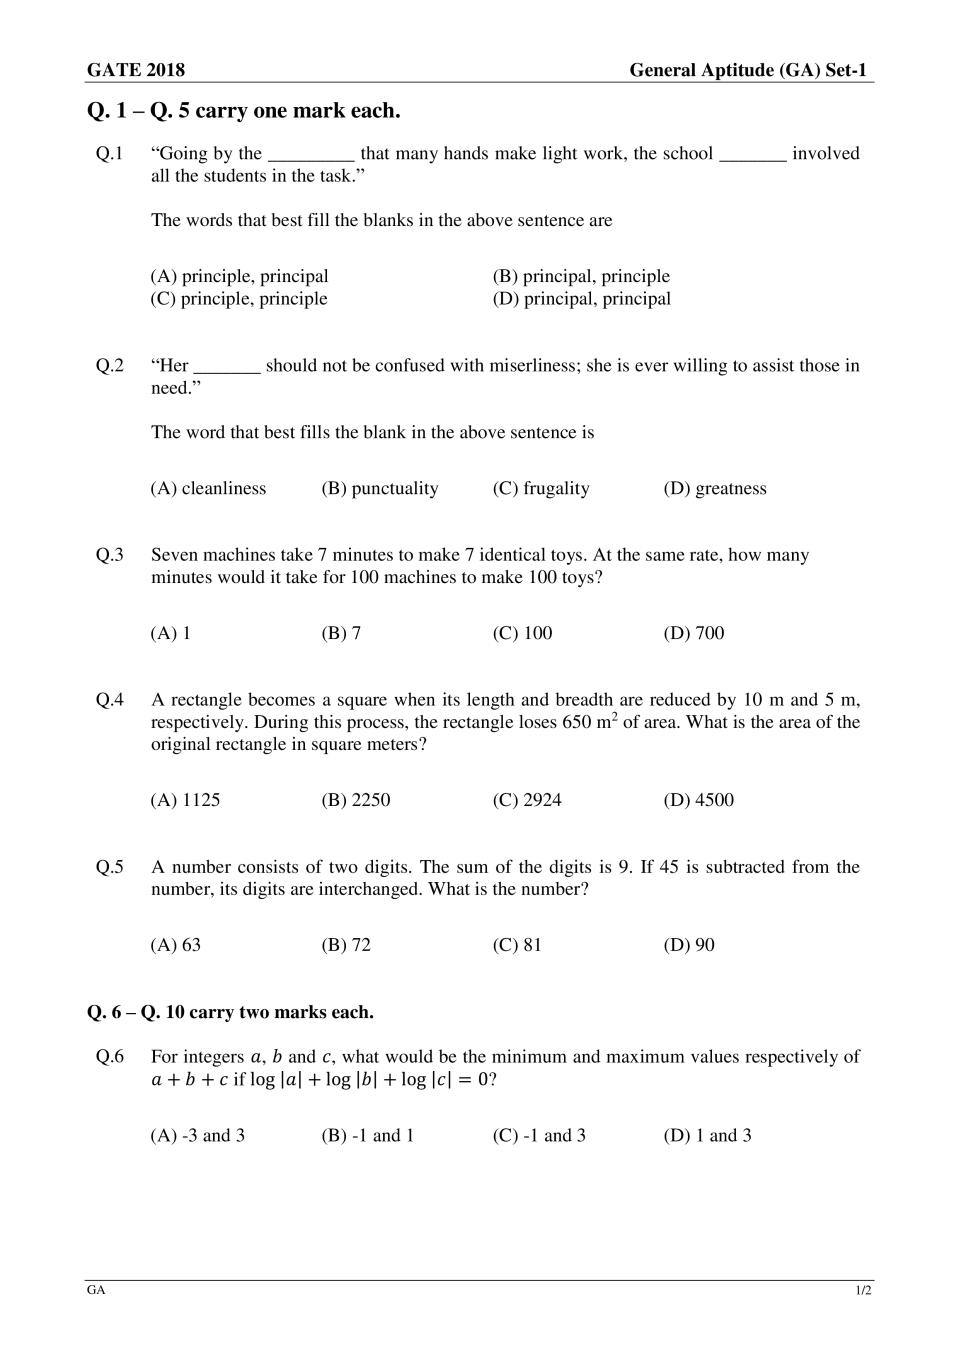 GATE 2018 Engineering Mathematics (XE-A) Question Paper with Answer - Page 1